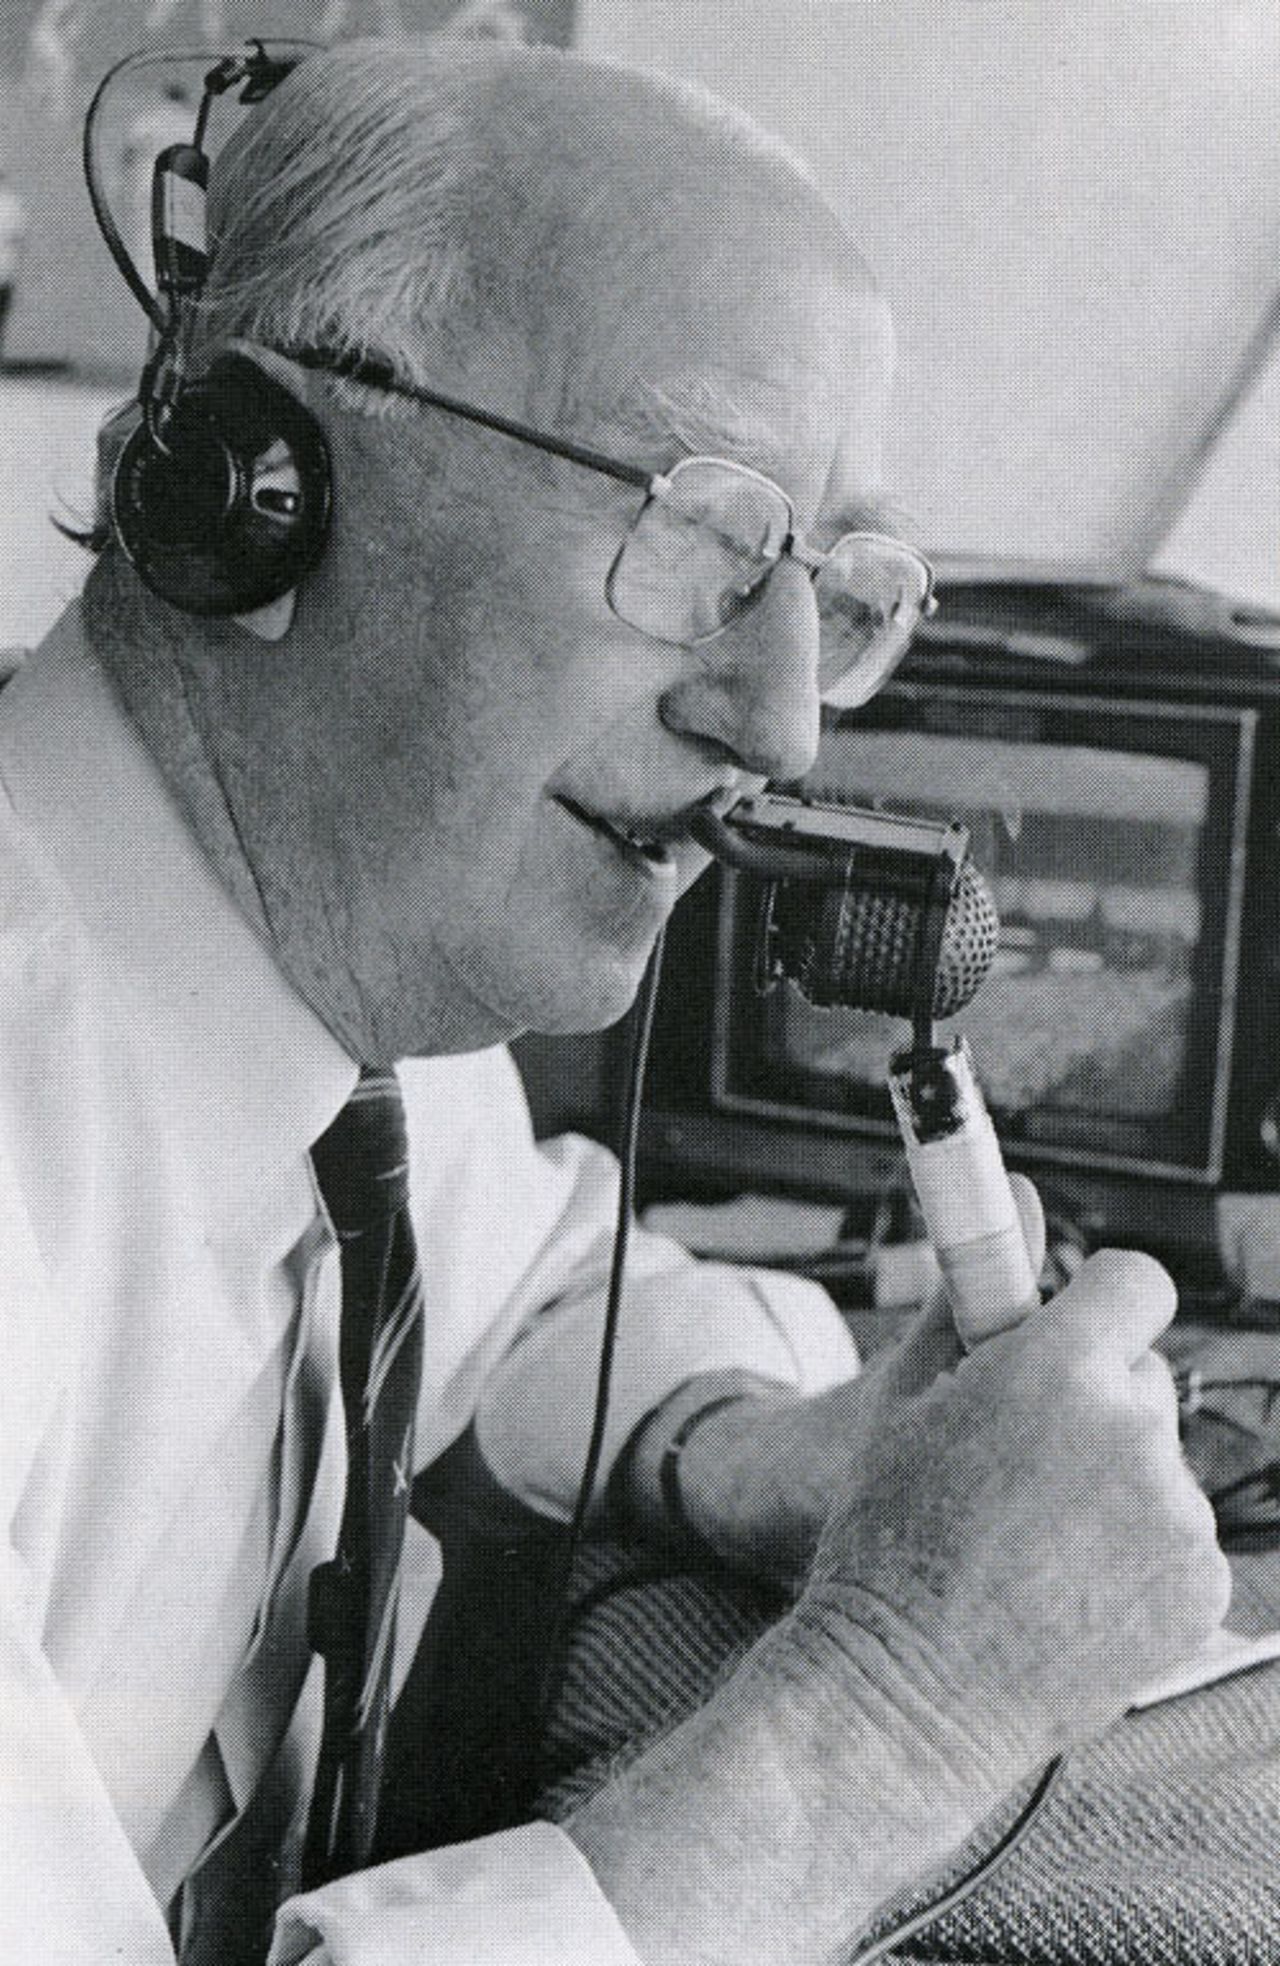 Alan McGilvray commentating on the Centenary Test, Lord's, August 29, 1980